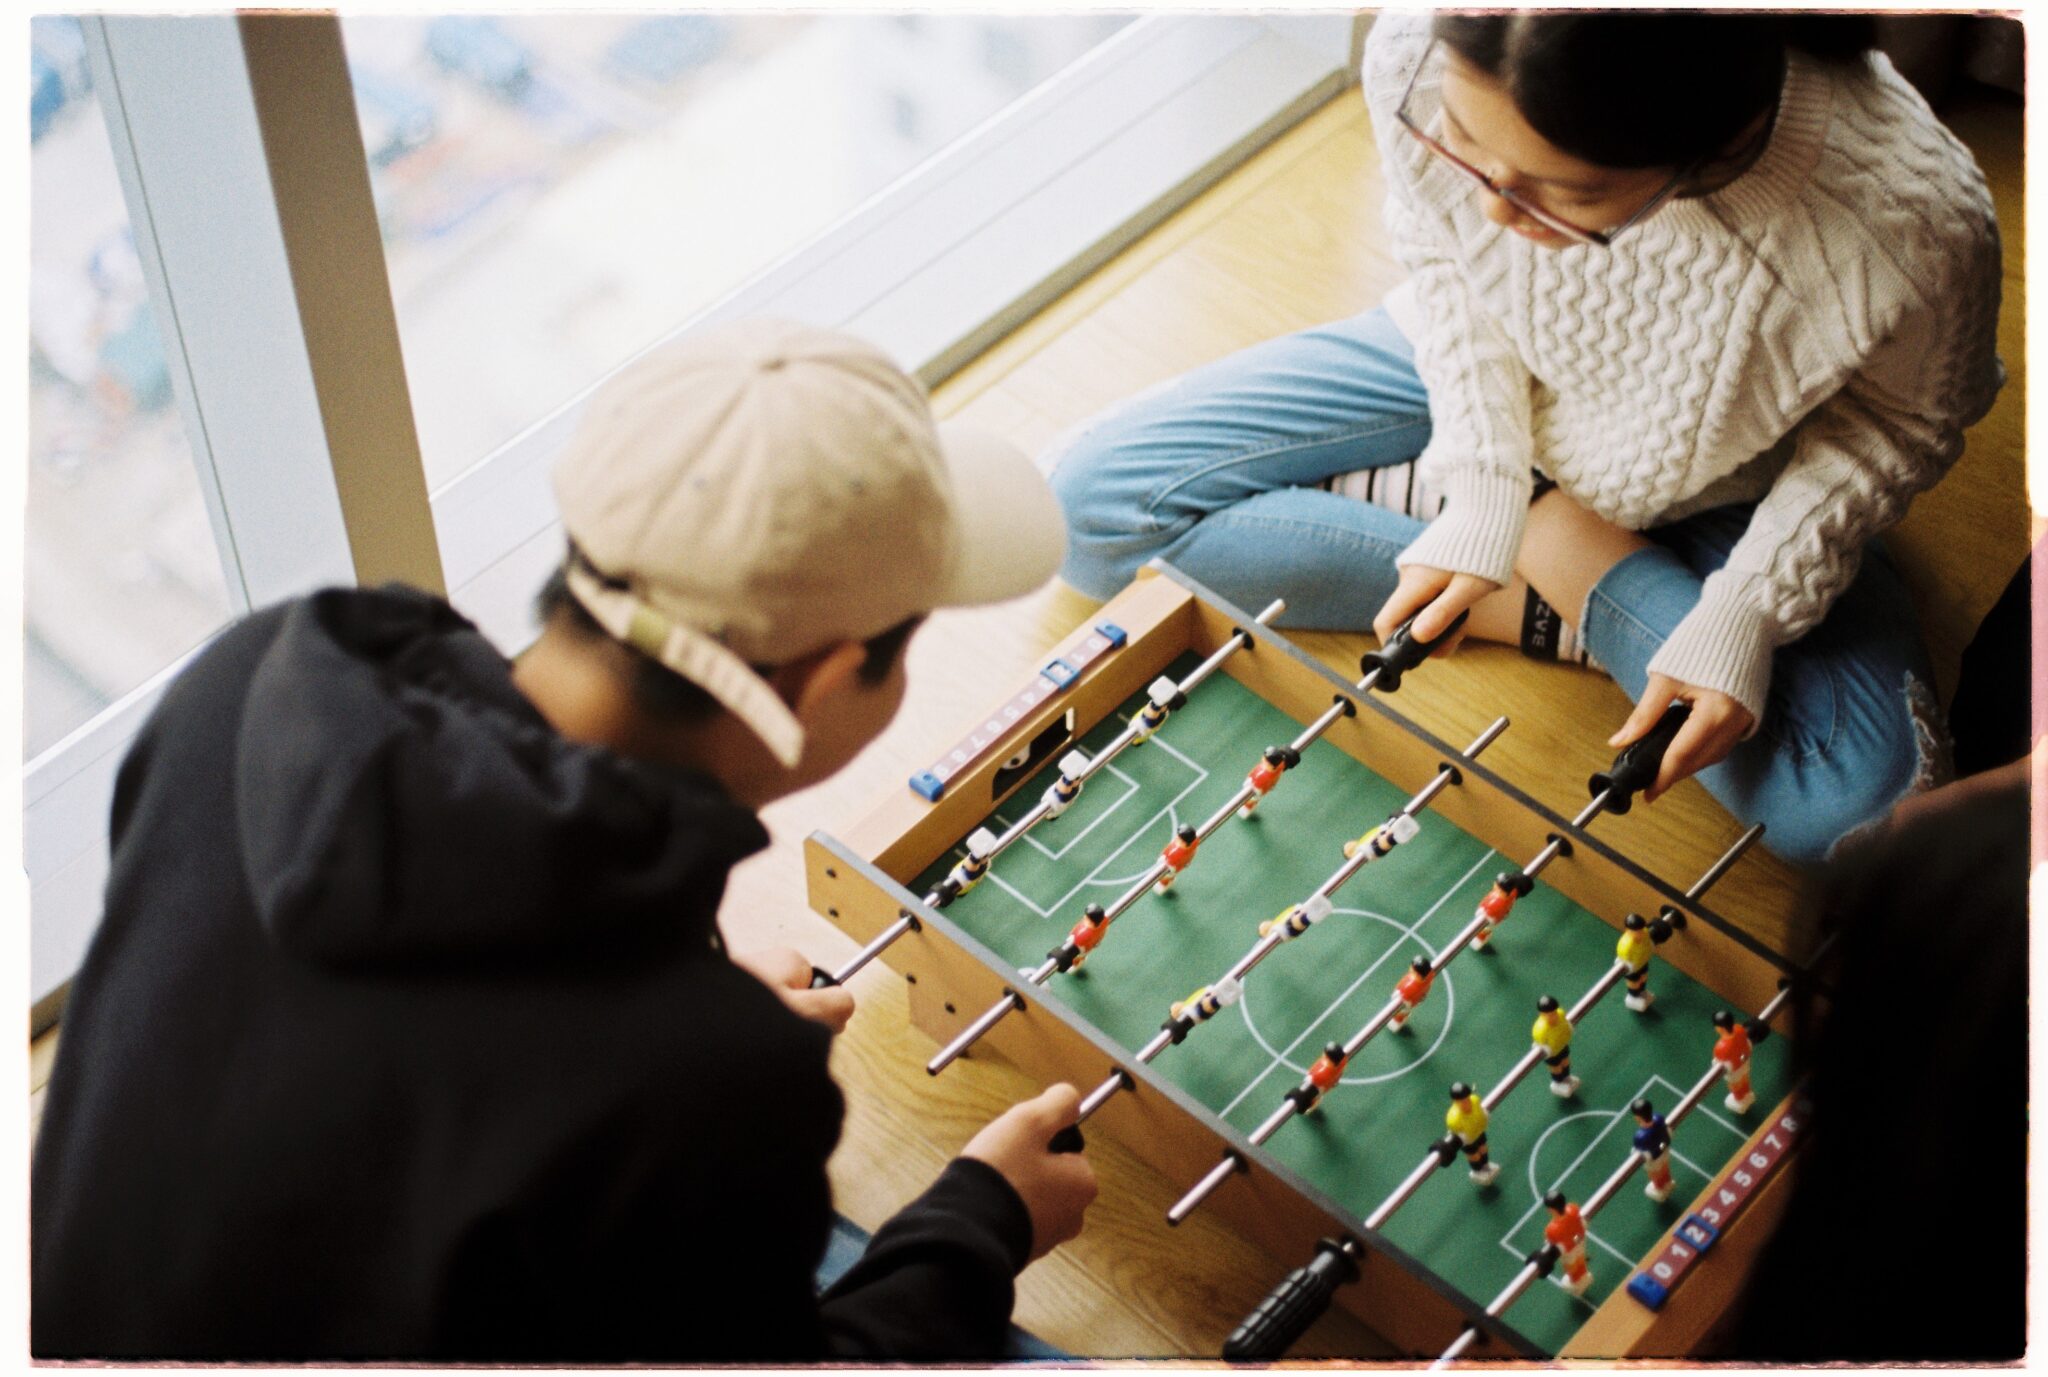 Two people playing foosball on a mini table